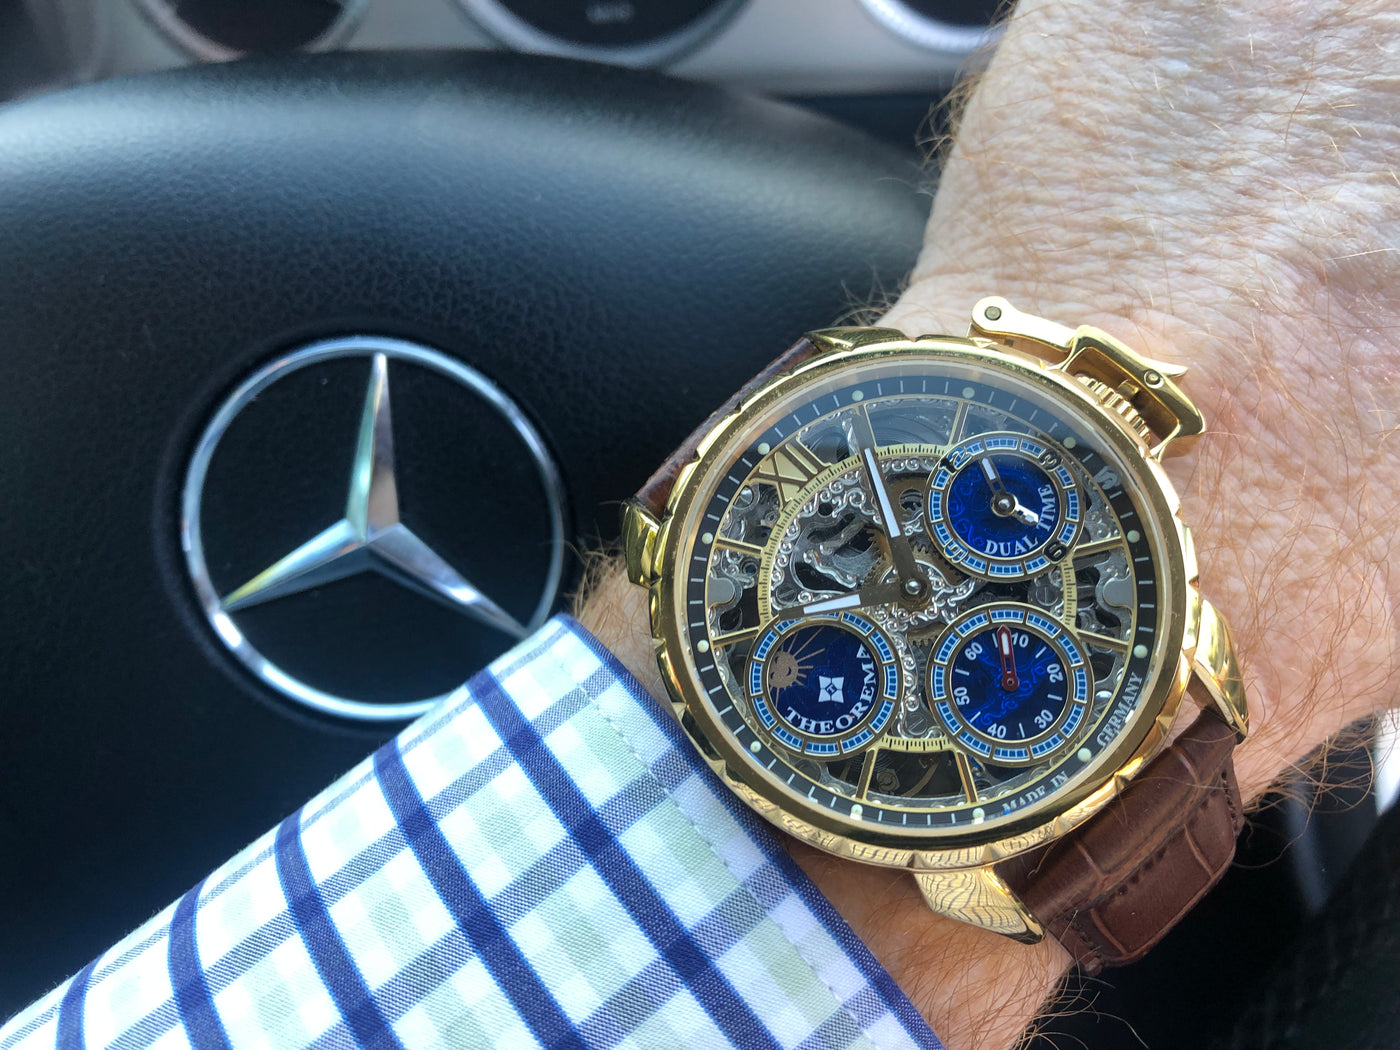 wrist shot photo of golden watch with skeletonize design and the Mercedes-Benz car logo